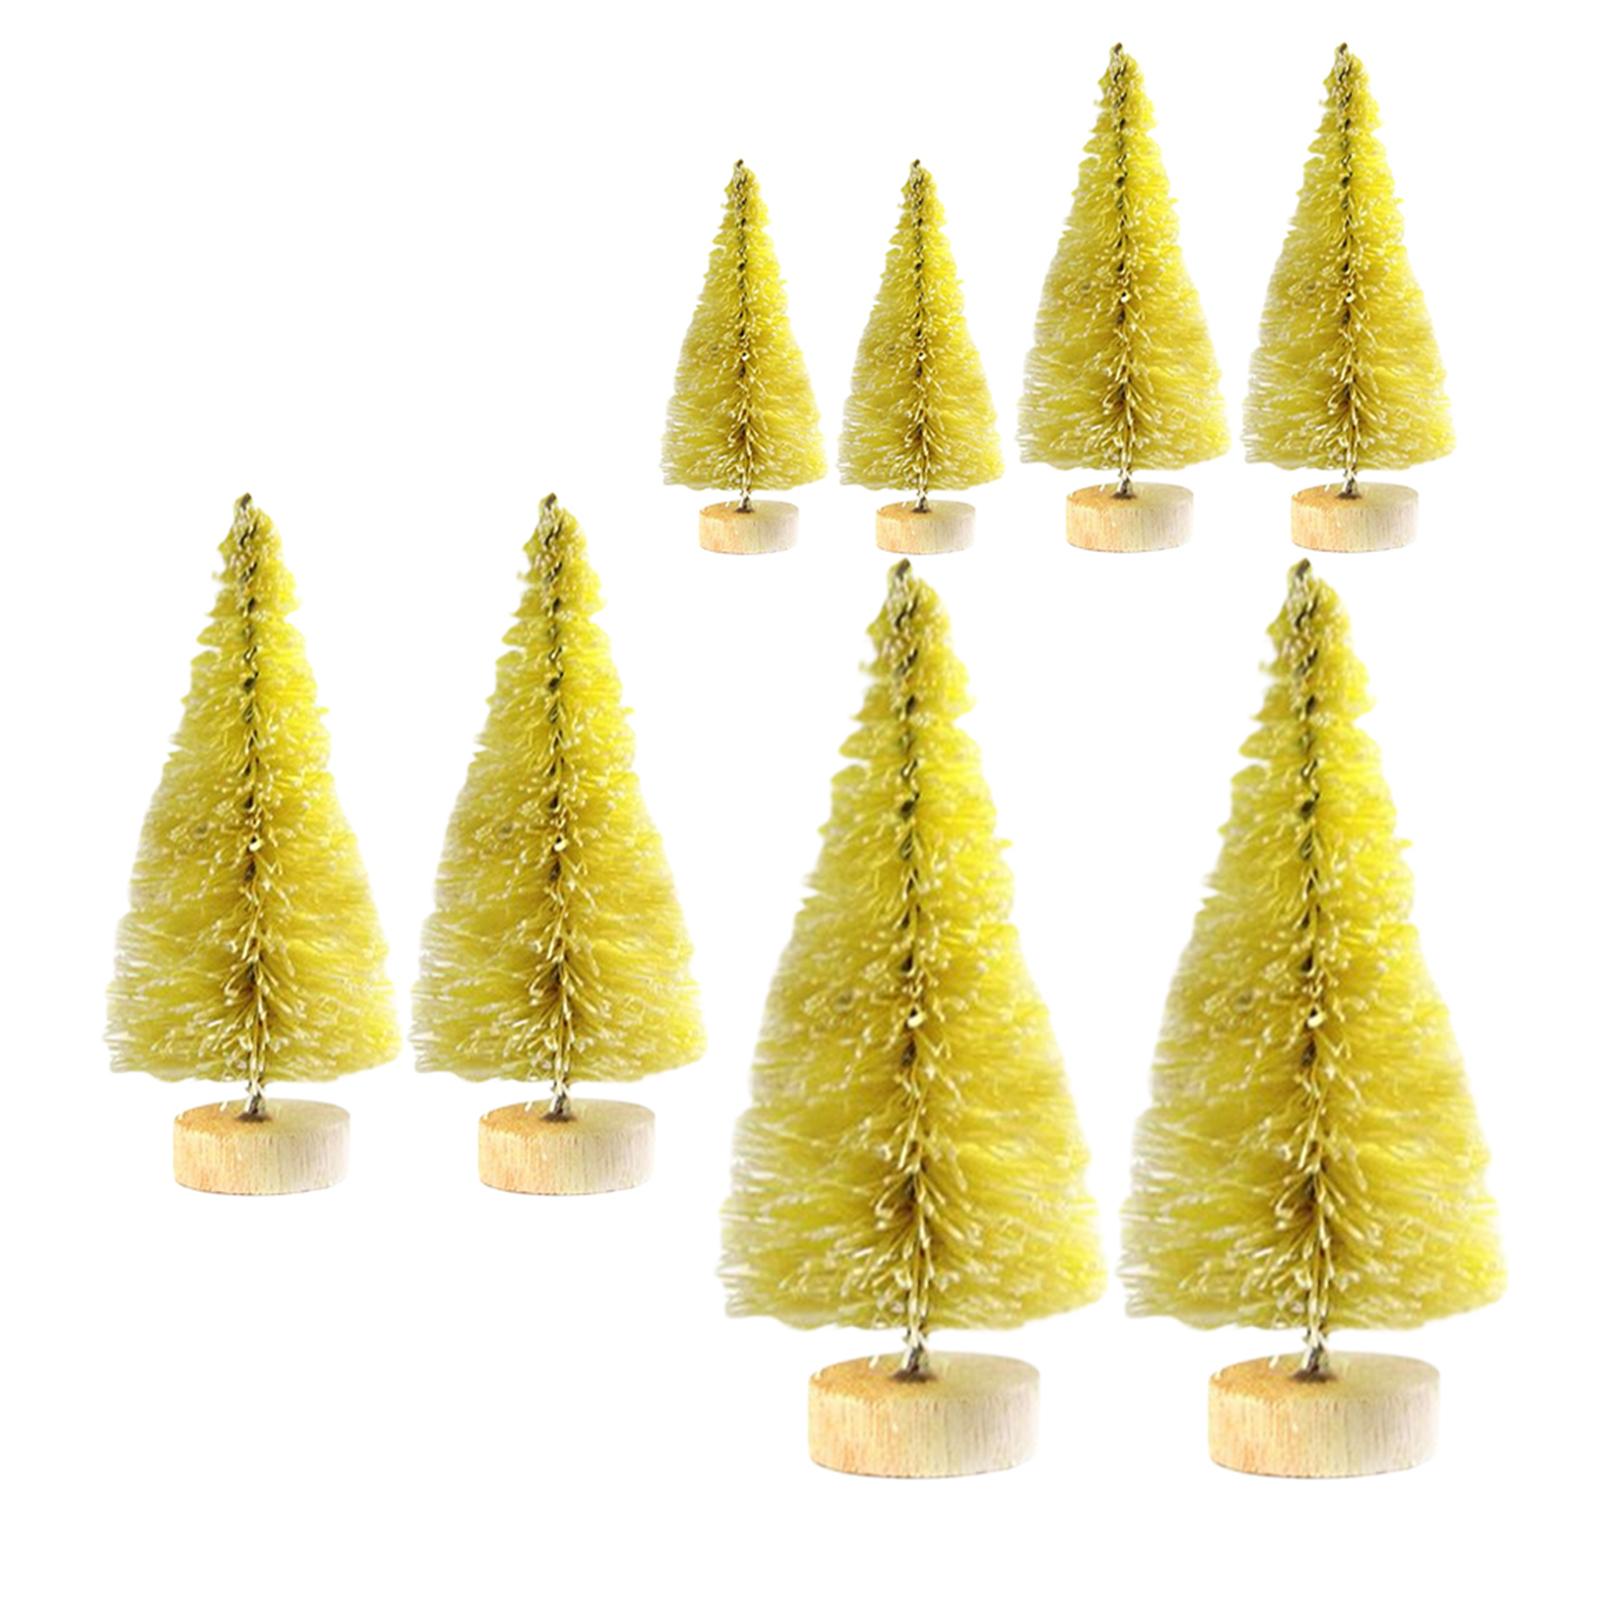 8x Desktop Miniature Pine Tree Ornaments for Desk Christmas Party Holiday Yellow